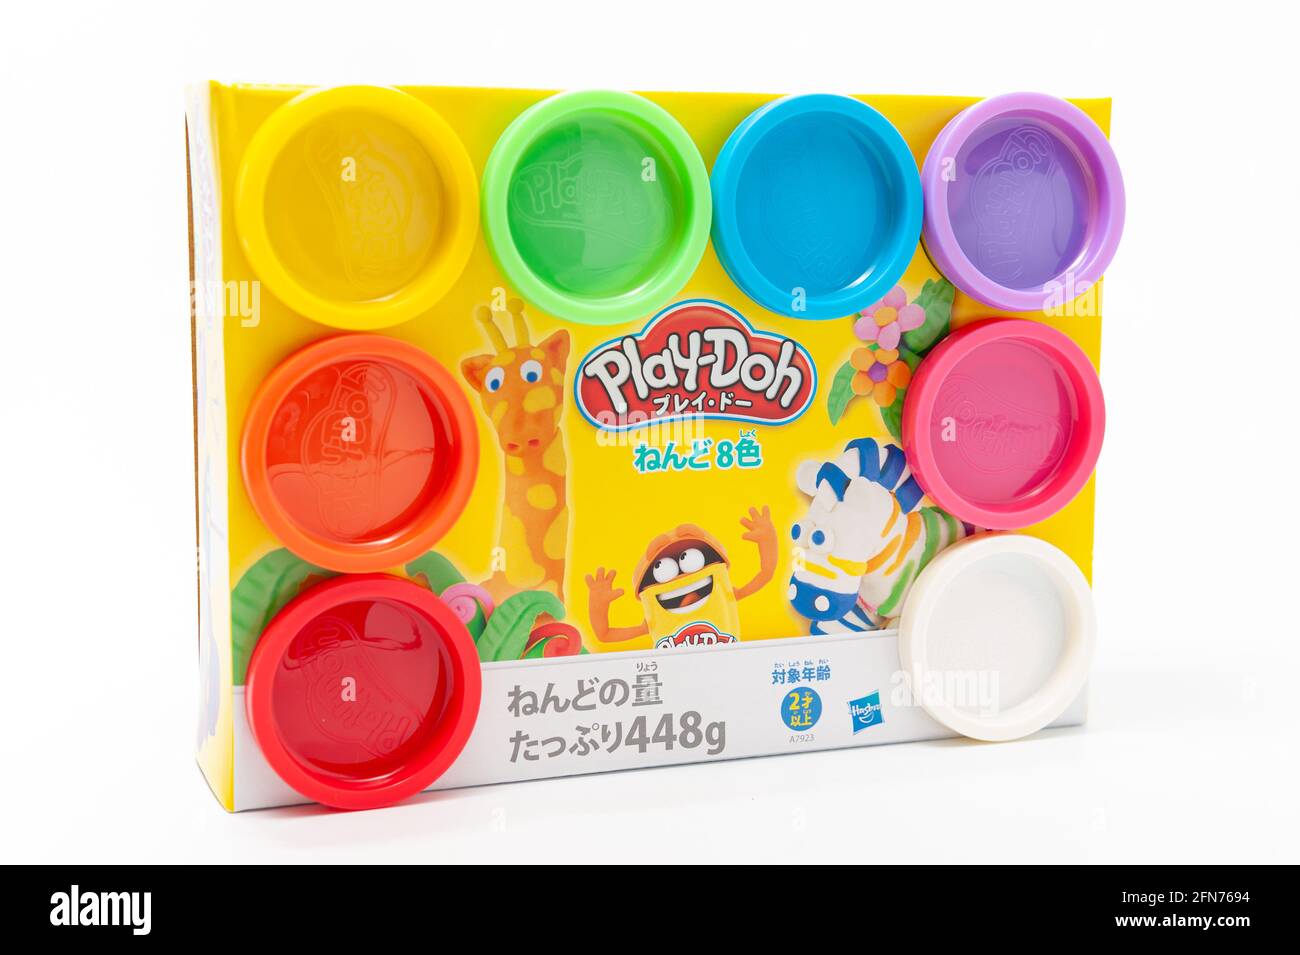 Fuji City, Shizuoka-Ken, Japan - April 29, 2021: Box with 8 colors of Play-Doh modeling clay by Hasbro. Isolated on white background. Stock Photo